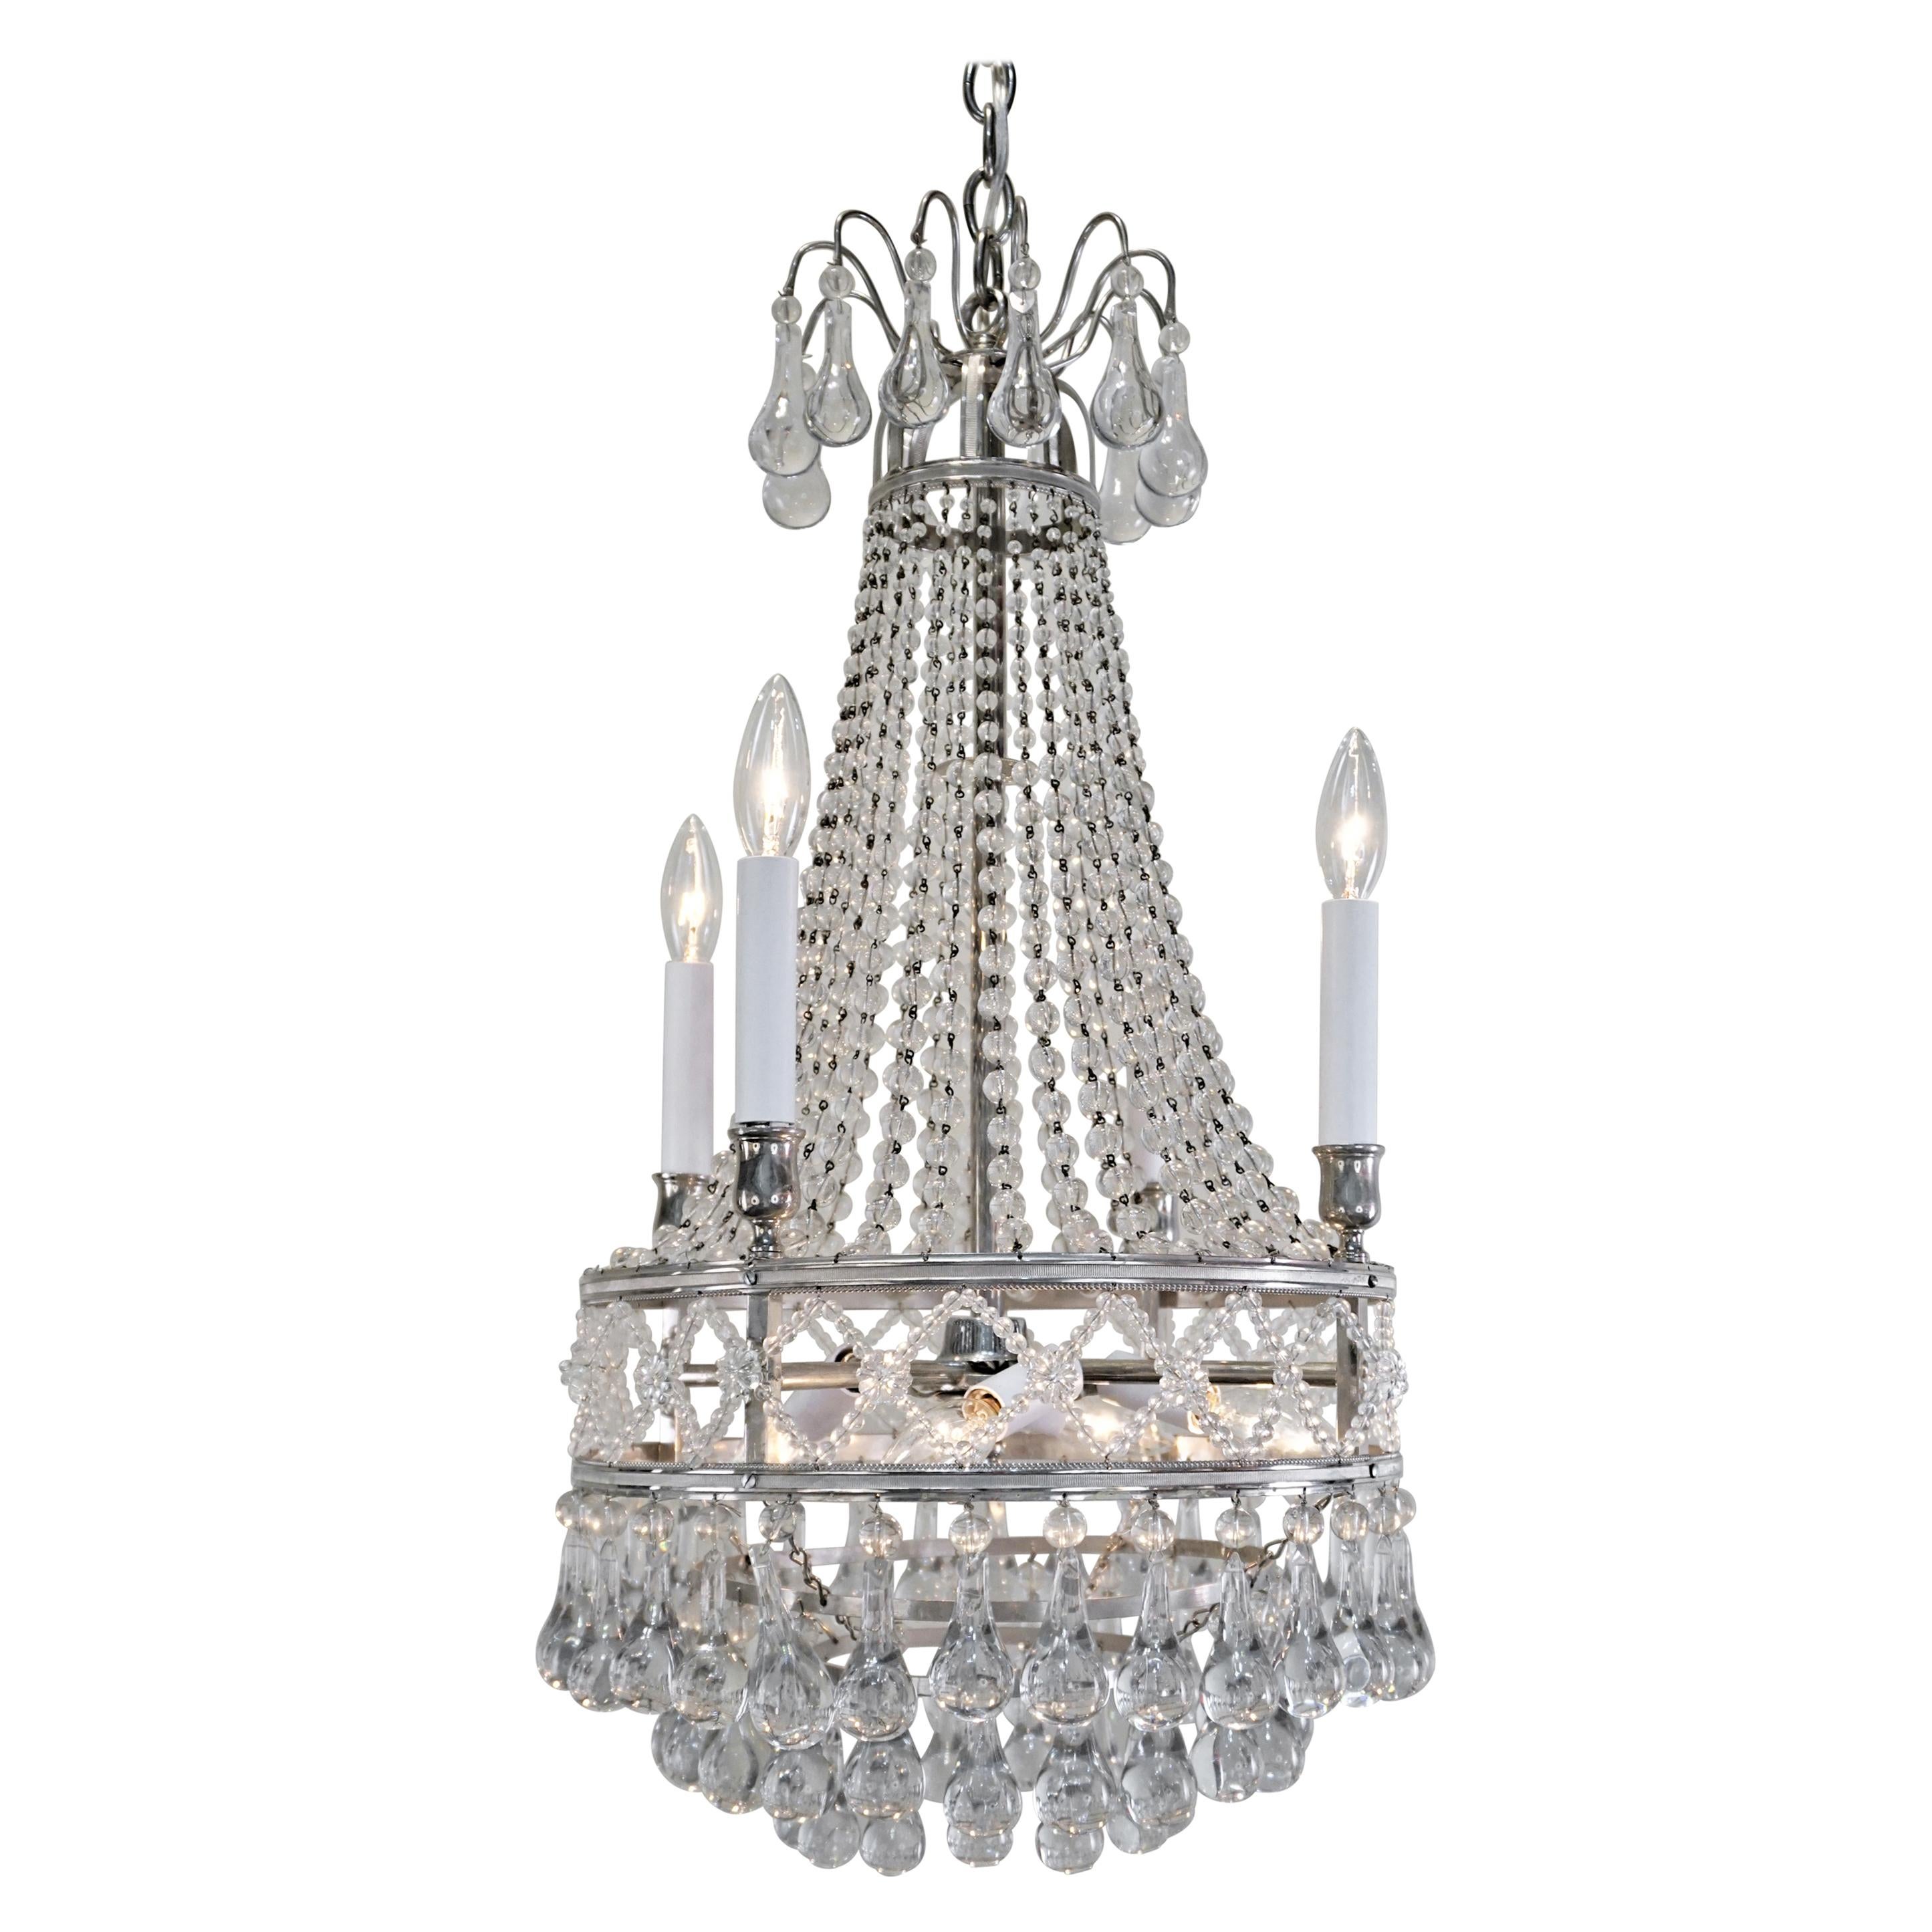 French 1930s Art Deco Crystal Chandelier